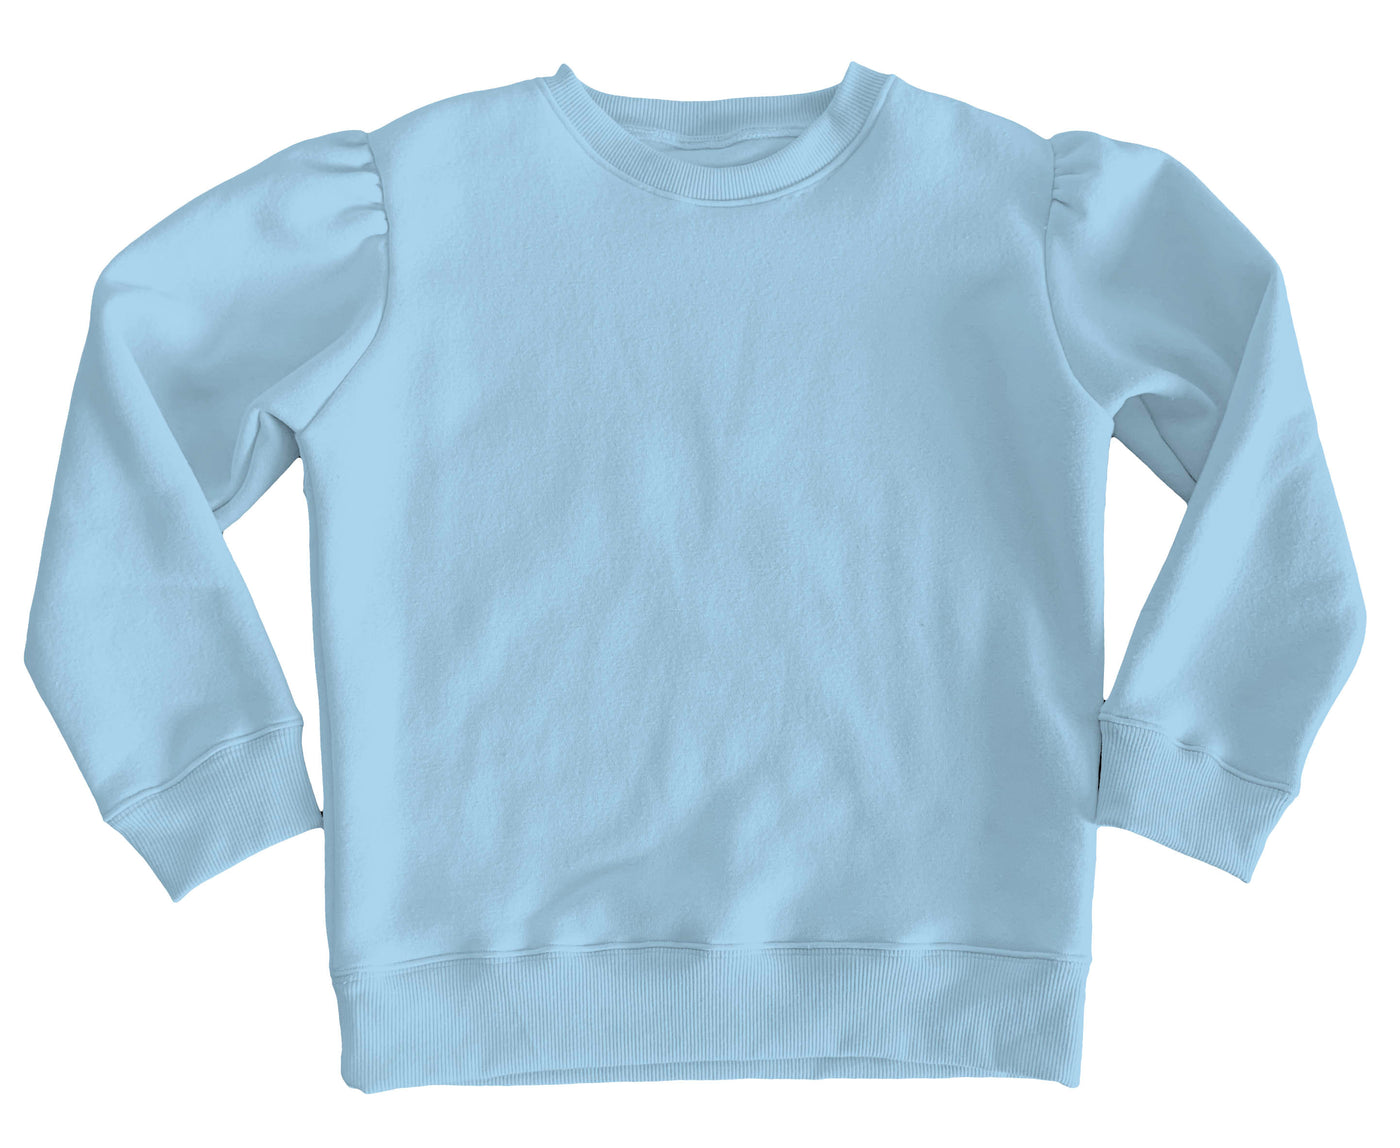 Holly Sweatshirt in Light Blue French Terry